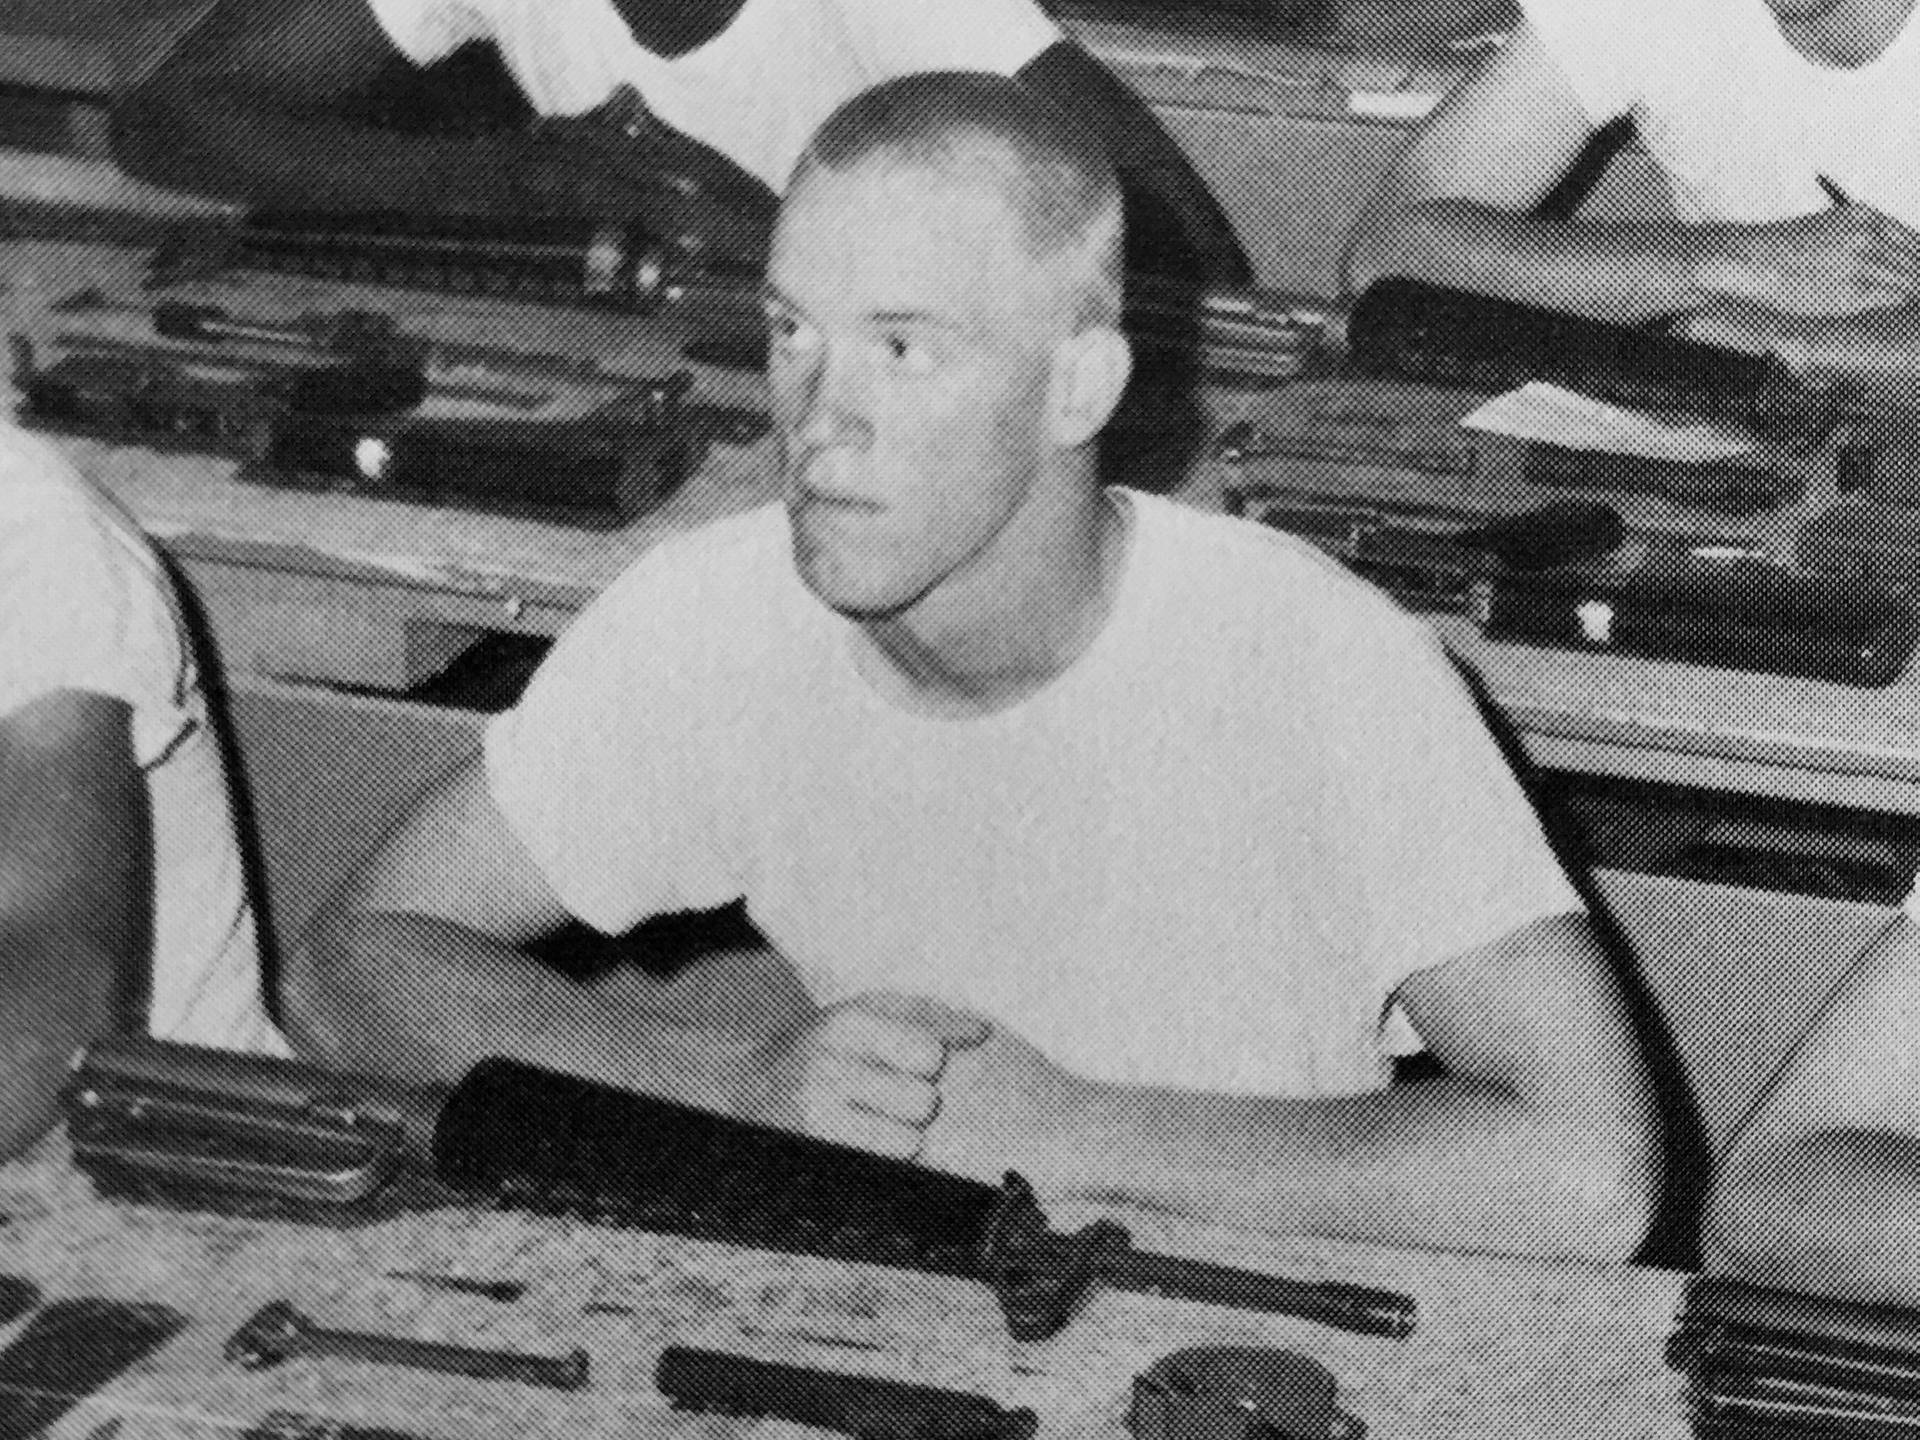 A young man in a white t-shirt at a desk with gun parts laid out in front of him.